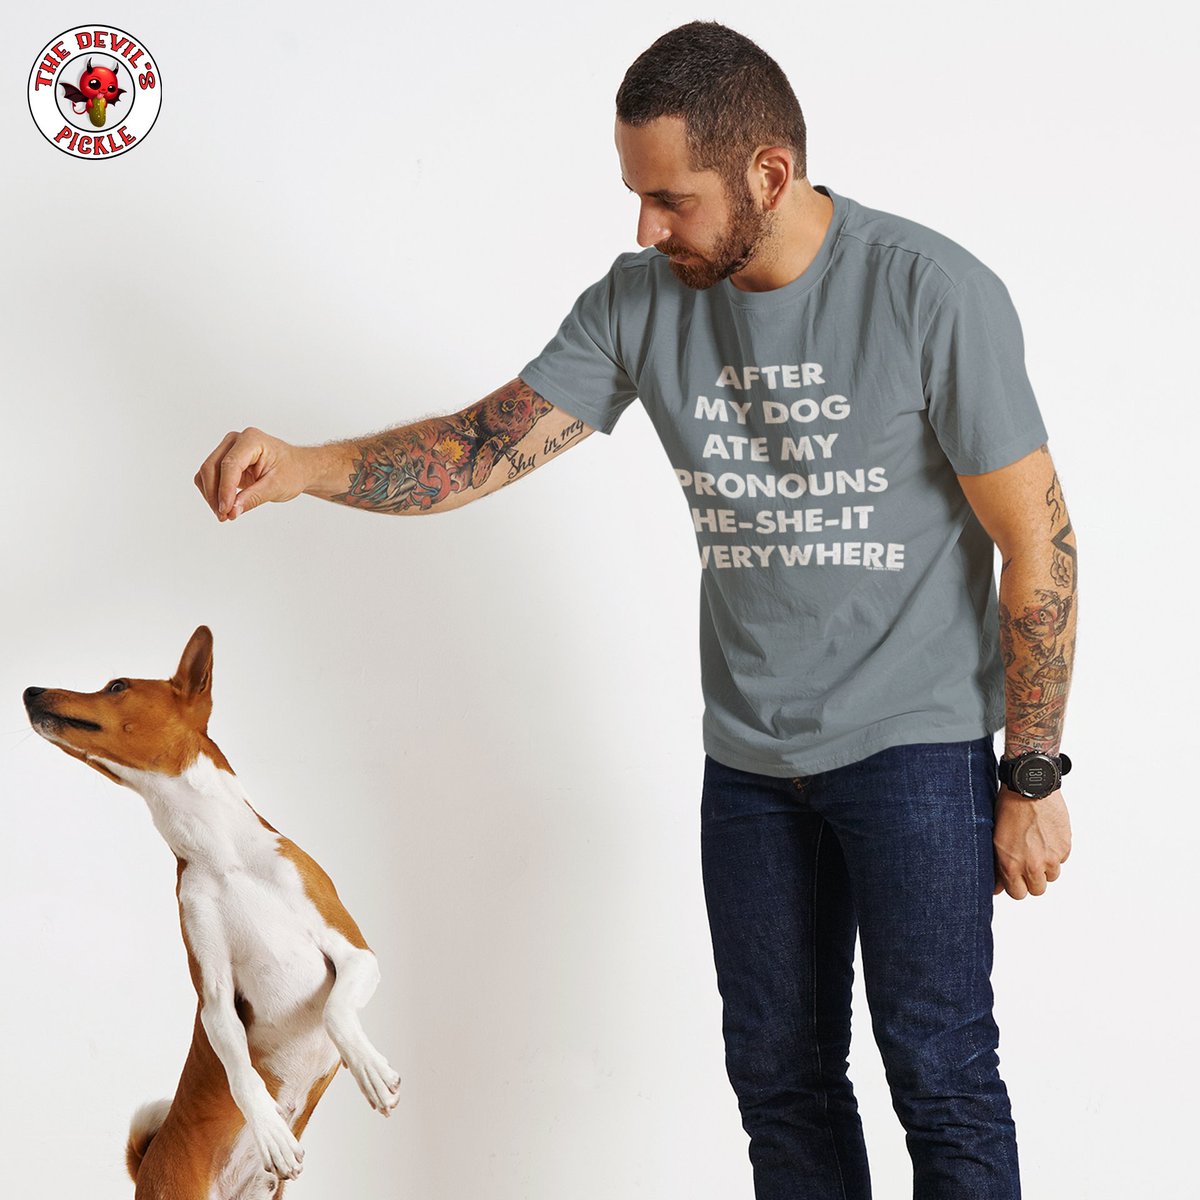 Looks like pronouns upset my pups stomach just like they do mine! Adult Humor Shirts available at The Devil's Pickle.

#adultmeme #thedevilspickle #offensive #funshirts #adulthumor #onlythebest #offensivetshirts #merica #suggestive #adulttees #funnyapparel